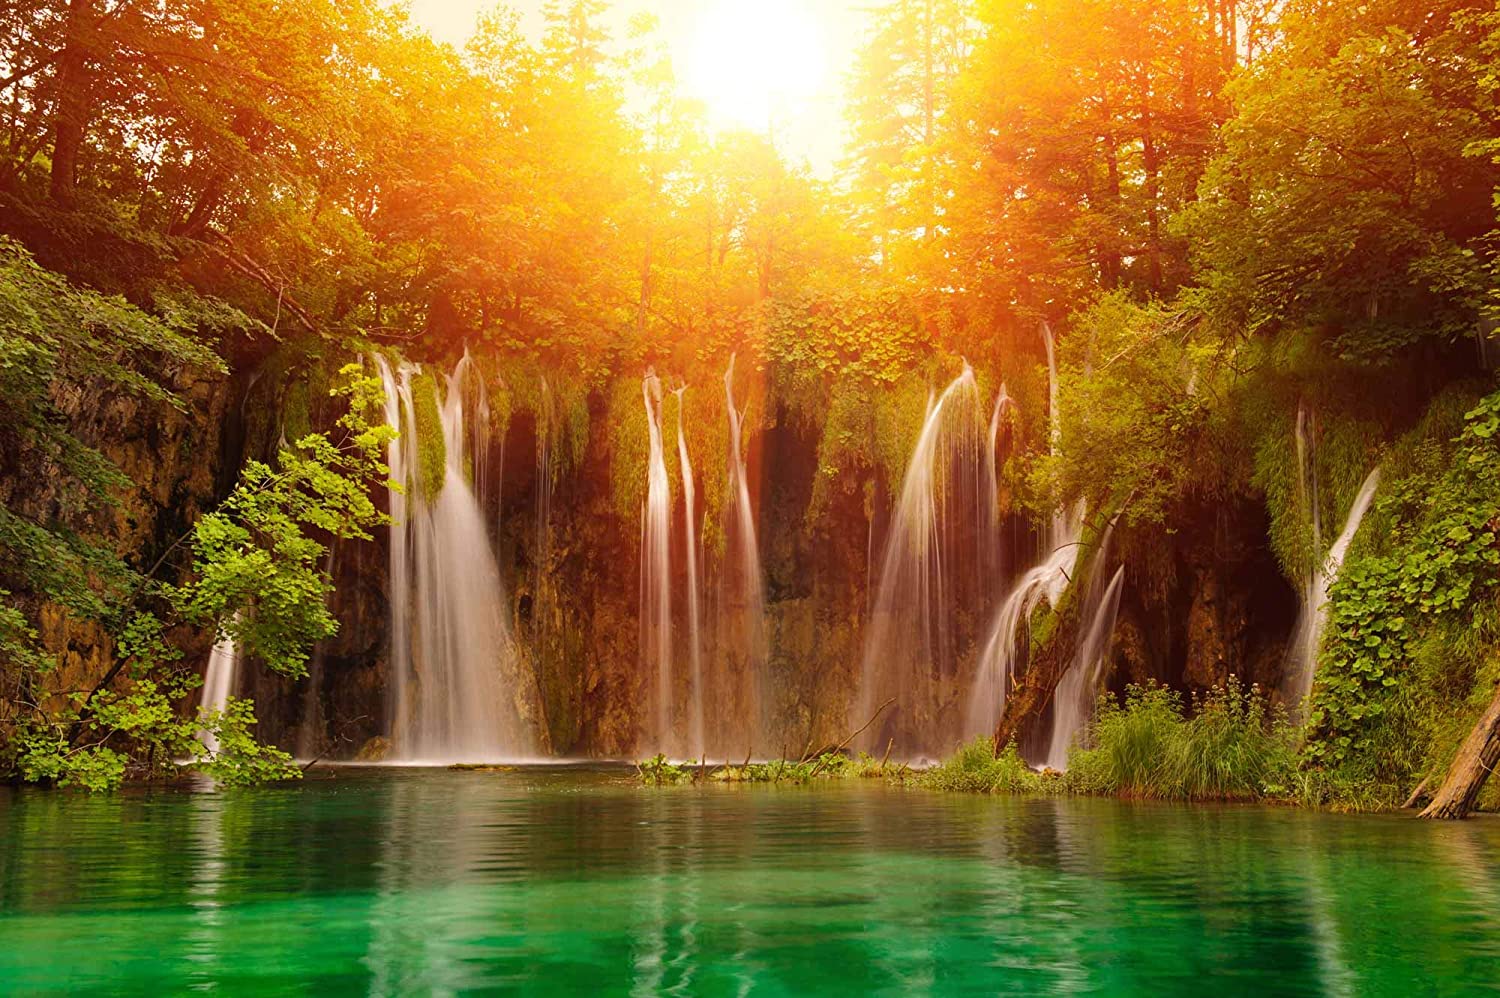 Amazon.com, LELEZ 10X7FT Waterfall Backdrop Nature Landscape Background Clear Lake Green Forest Sunshine Photography Backdrop Spring Mountain Water Outdoorsy Theme Party Decoration Wallpaper Studio Props SPGE079